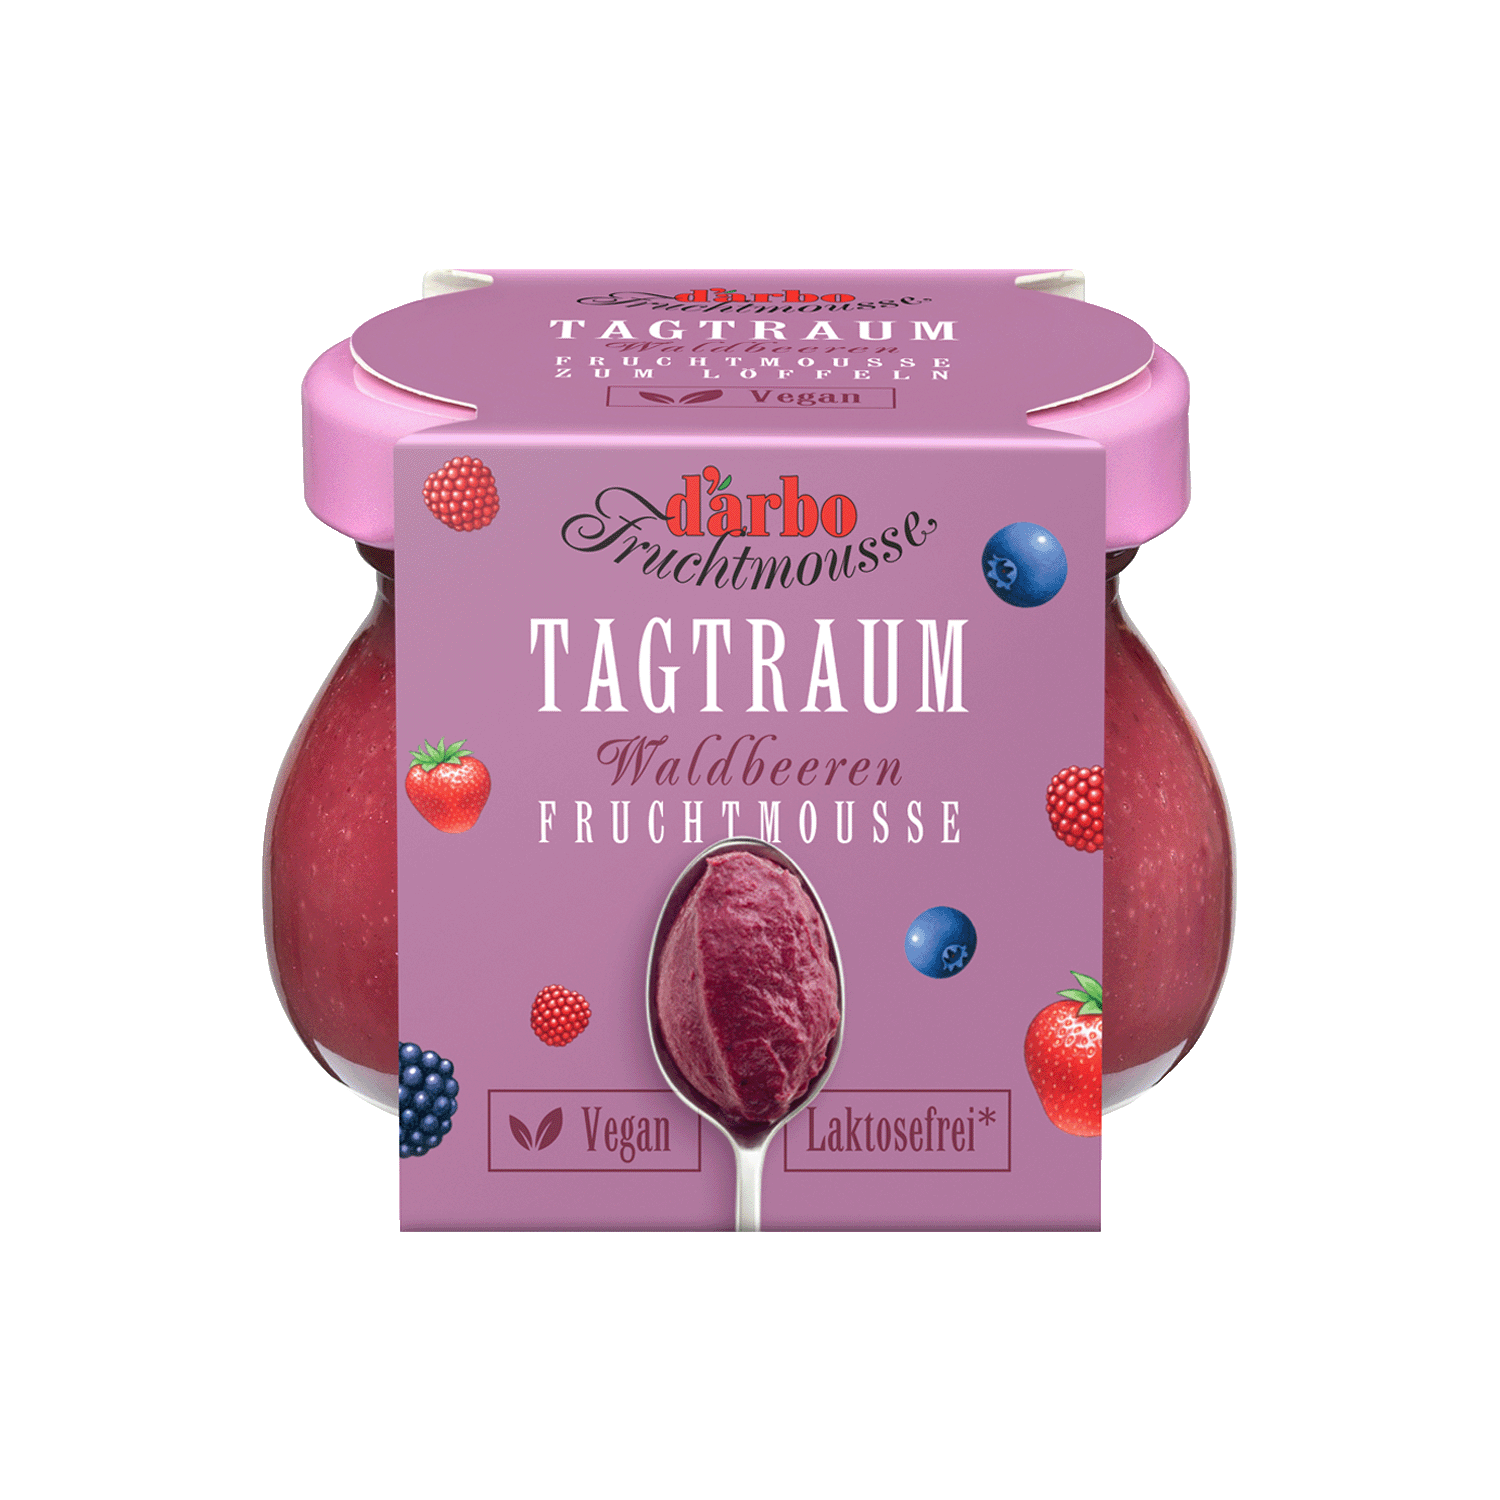 "Tagtraum" Fruit mousse Wild Berry, 90g